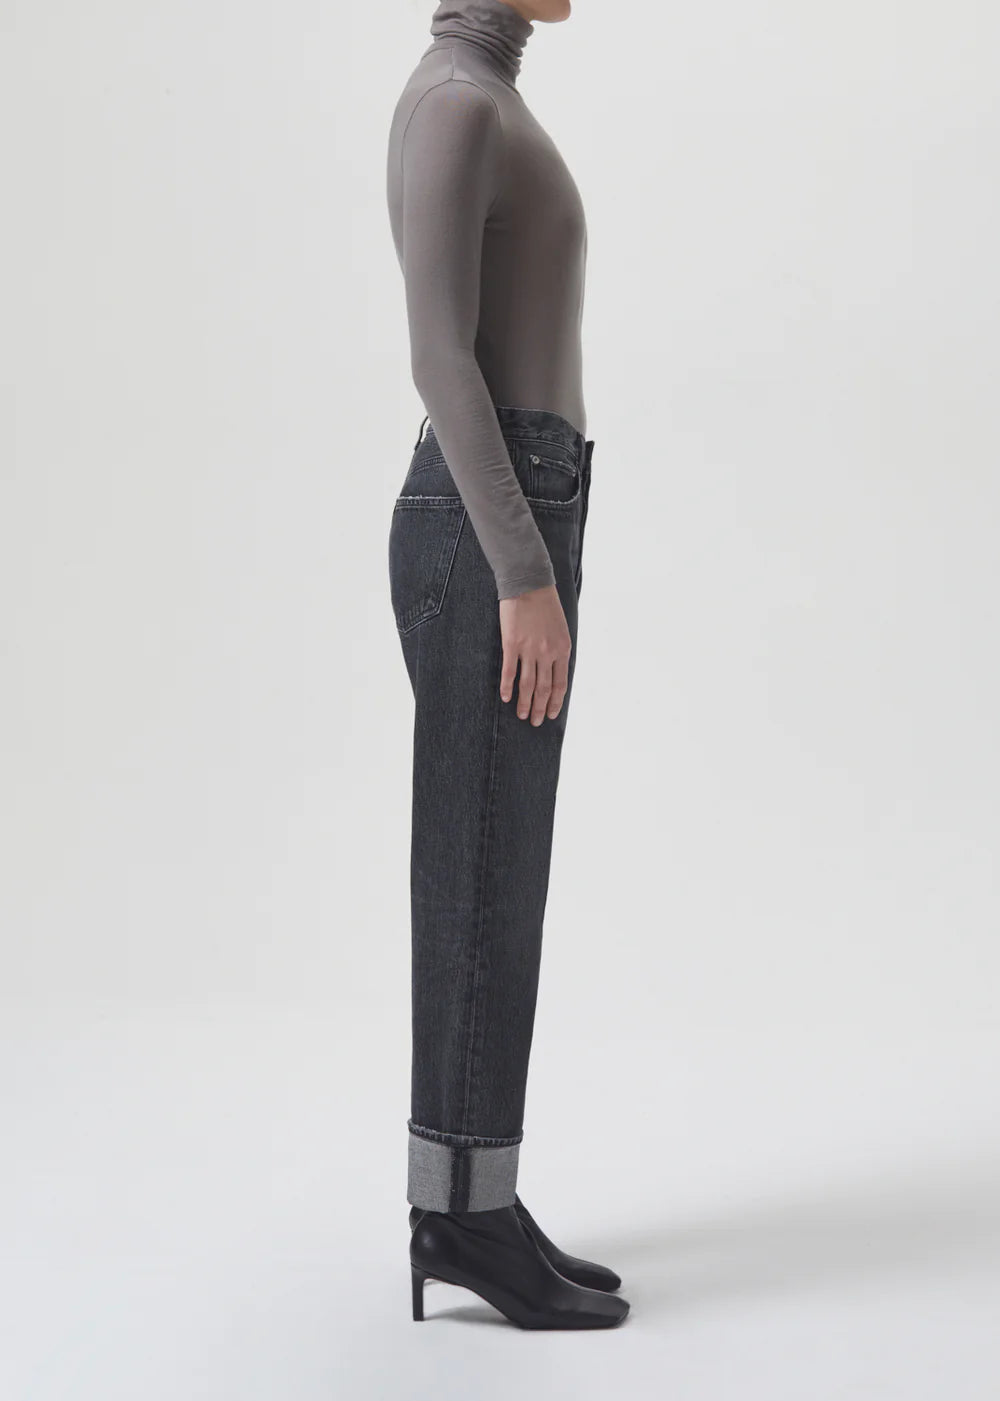 A woman wearing black AGOLDE Fran Low Slung Straight - Ditch jeans, made with AGOLDE's regenerative cotton, and a turtle neck top.